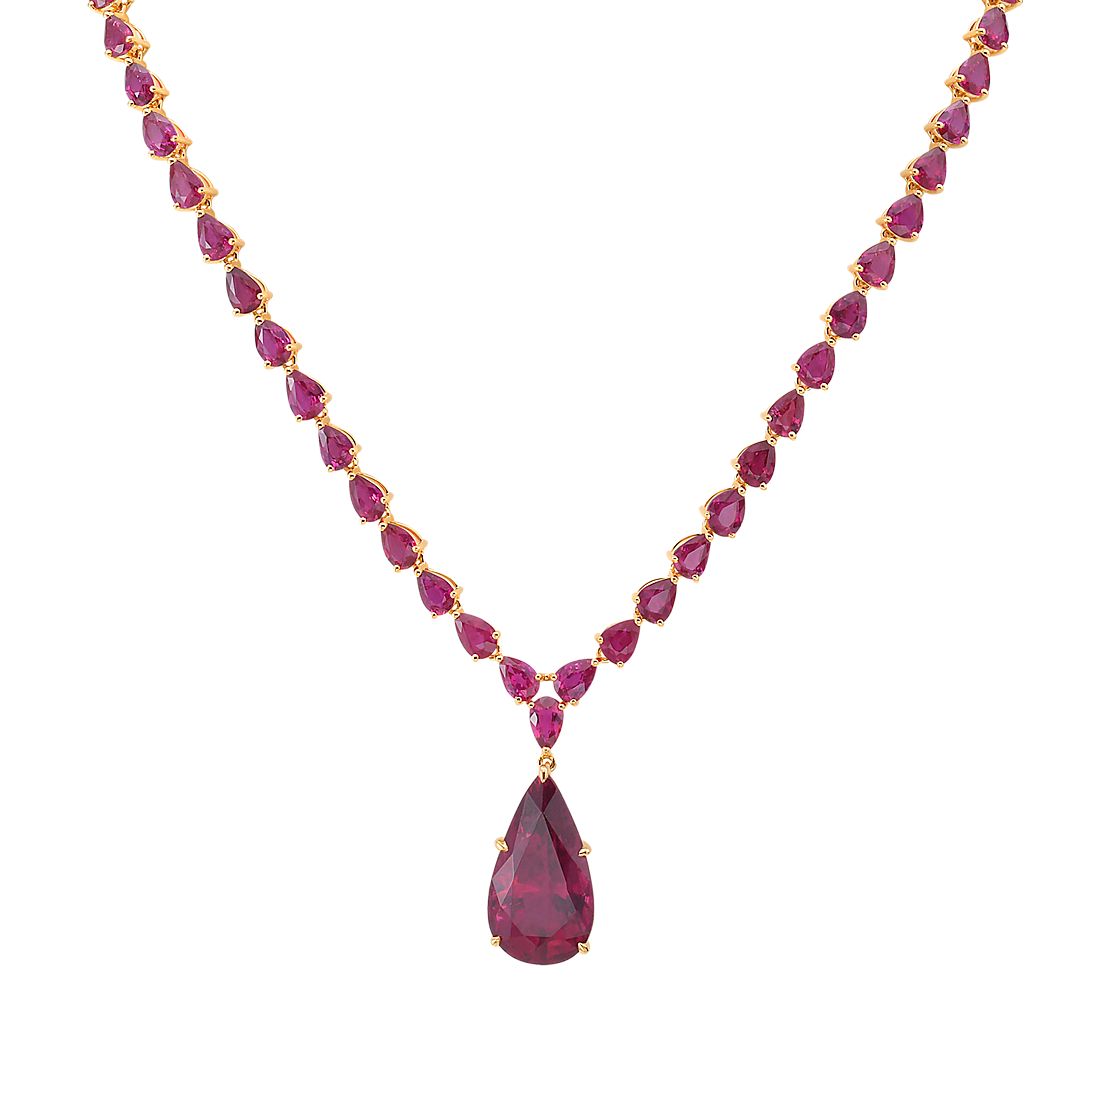 Rubellite Tourmaline and Ruby Necklace in 18k Yellow Gold